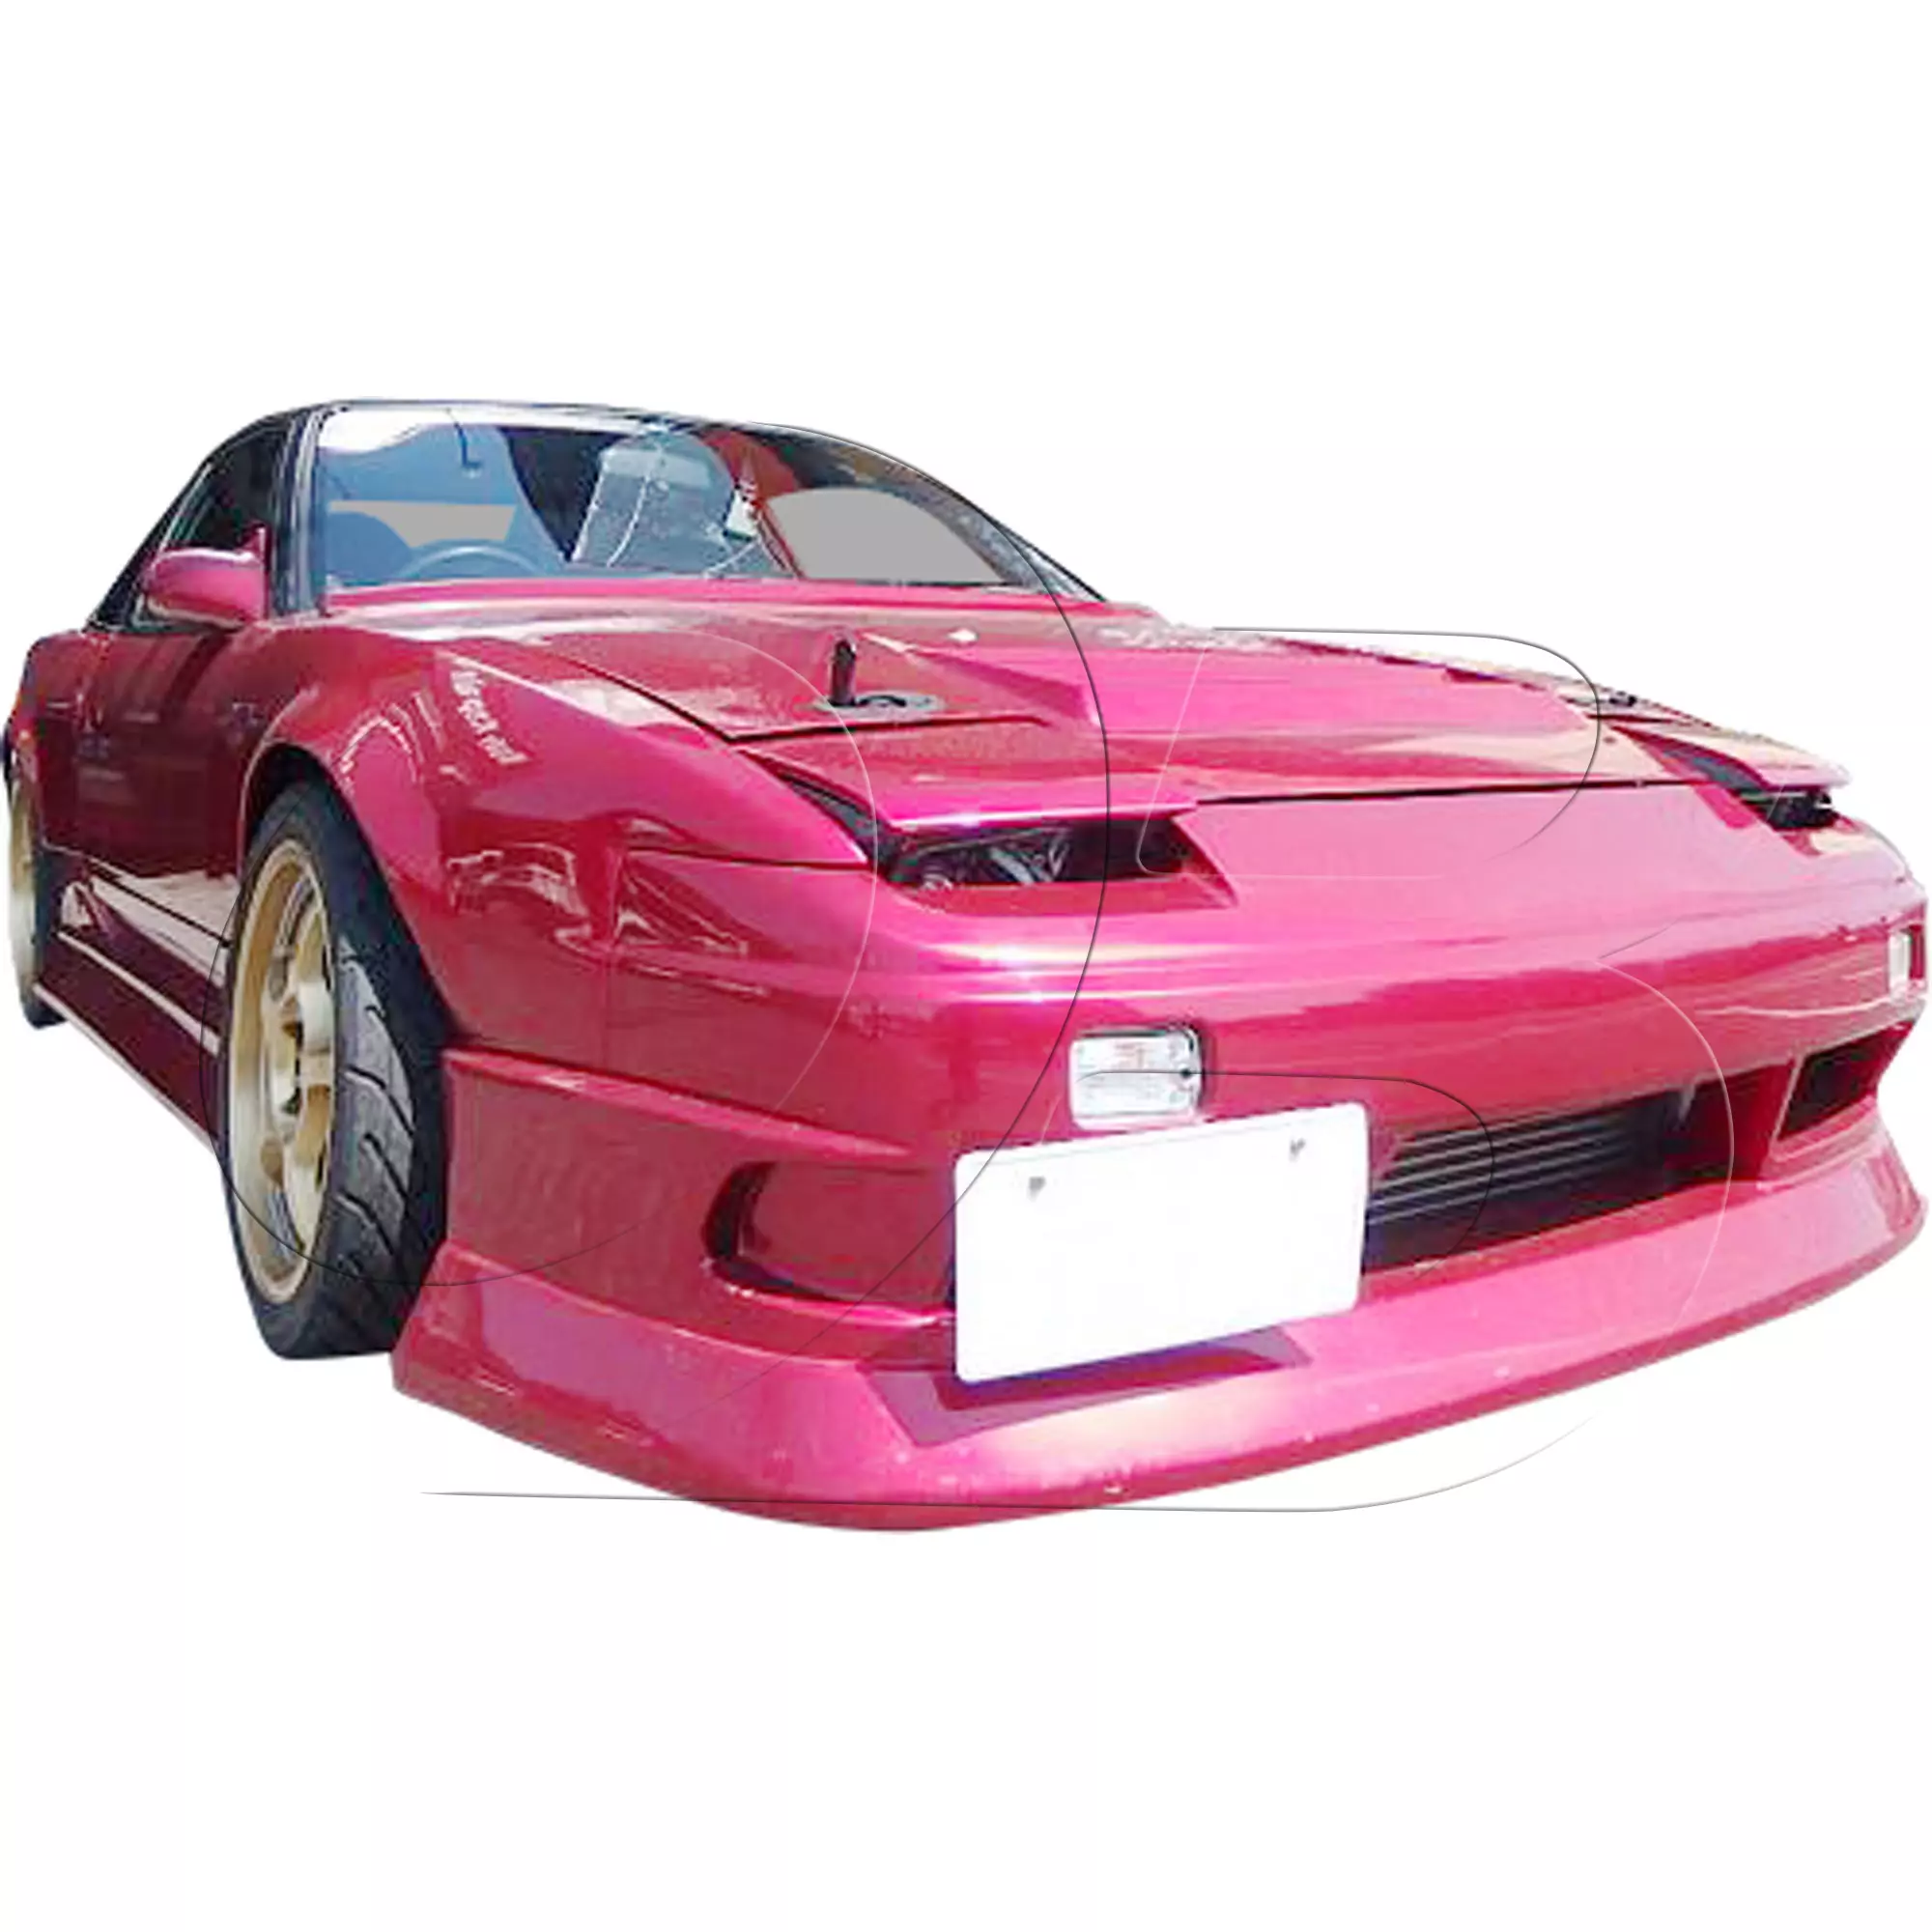 KBD Urethane Bsport2 Style 4pc Full Body Kit > Nissan 240SX 1989-1994 > 2dr Coupe - Image 20